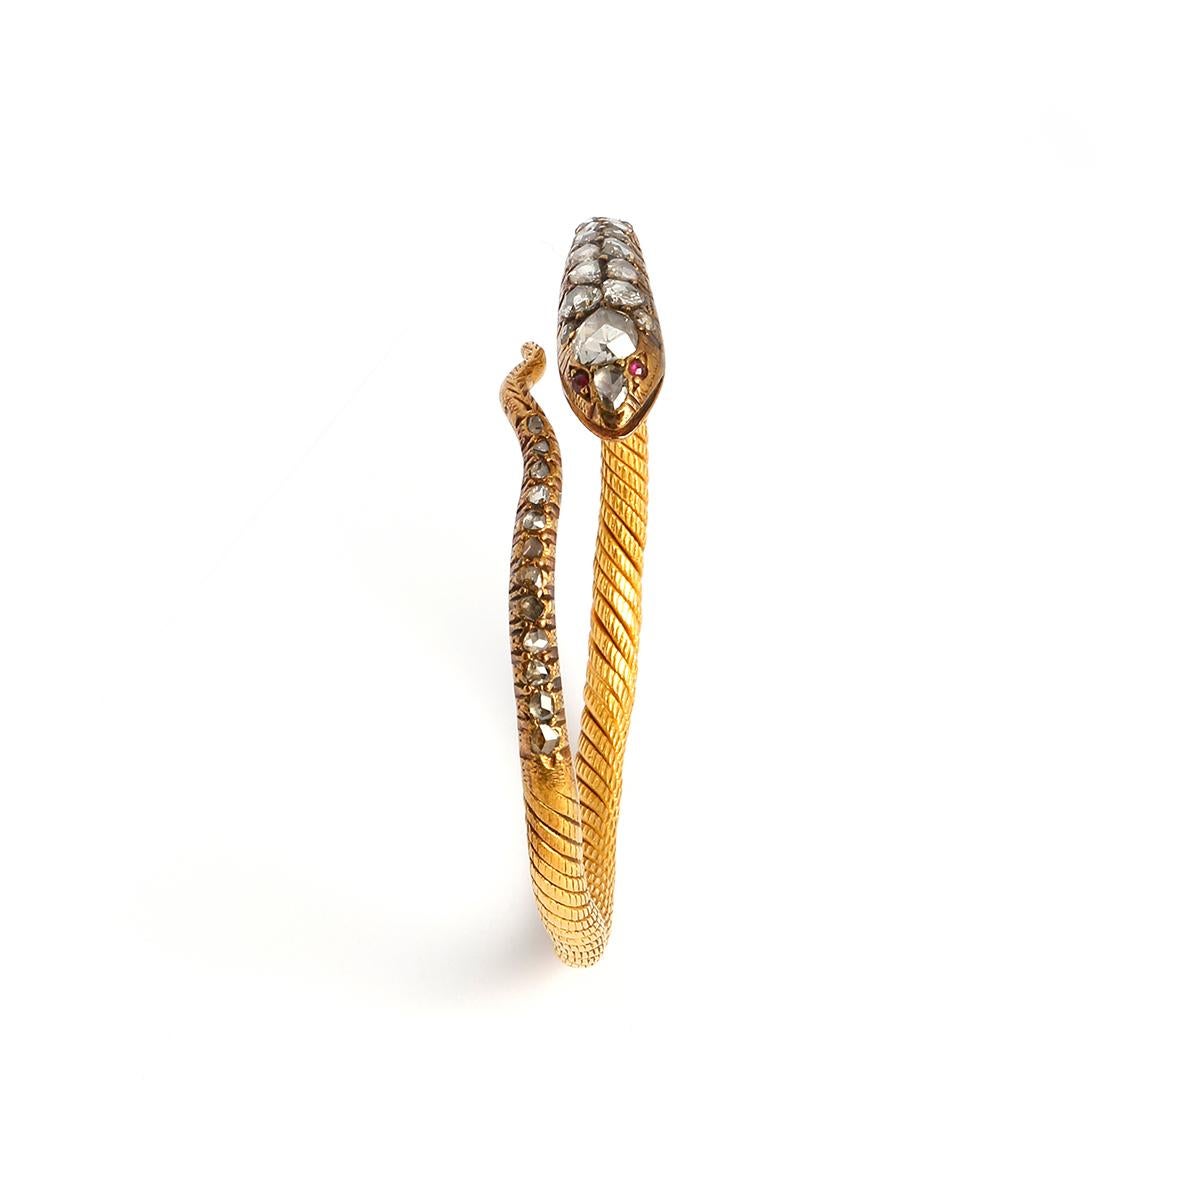 Bracelet Snake set by rose cut diamond. Total 3.50 carats on twisted yellow gold.

Rose cut Diamond size: 0,24x0,28 inch (0.6x0.7 centimeters) height 0,08 inch (0.2 centimeters)
Head's length: 1.57 inch (4.00 centimeters)
Size: 6 1/4 inches (16.00